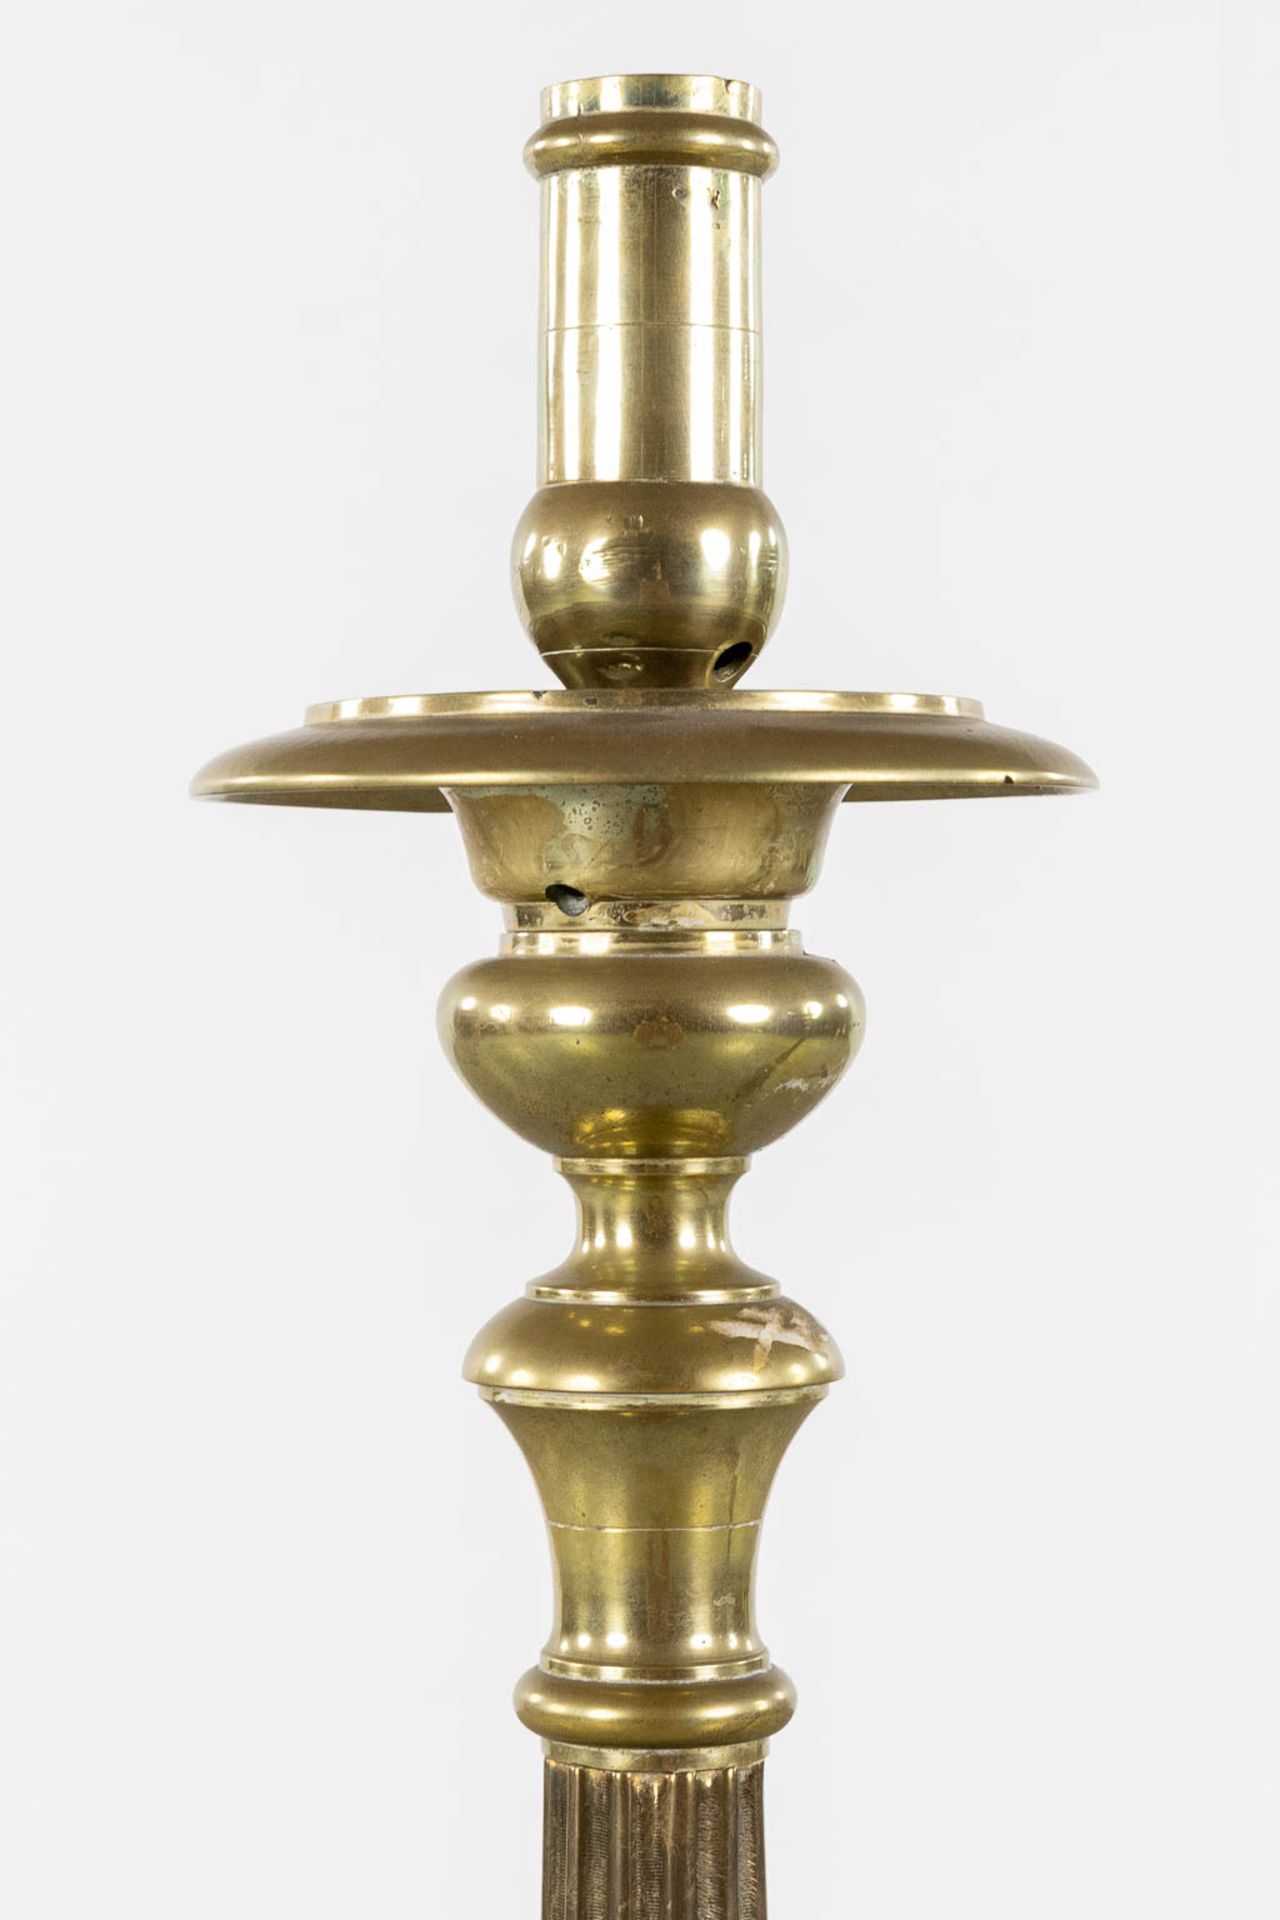 A pair of bronze church candlesticks/candle holders, Louis XV style. Circa 1900. (W:23 x H:105 cm) - Image 17 of 19